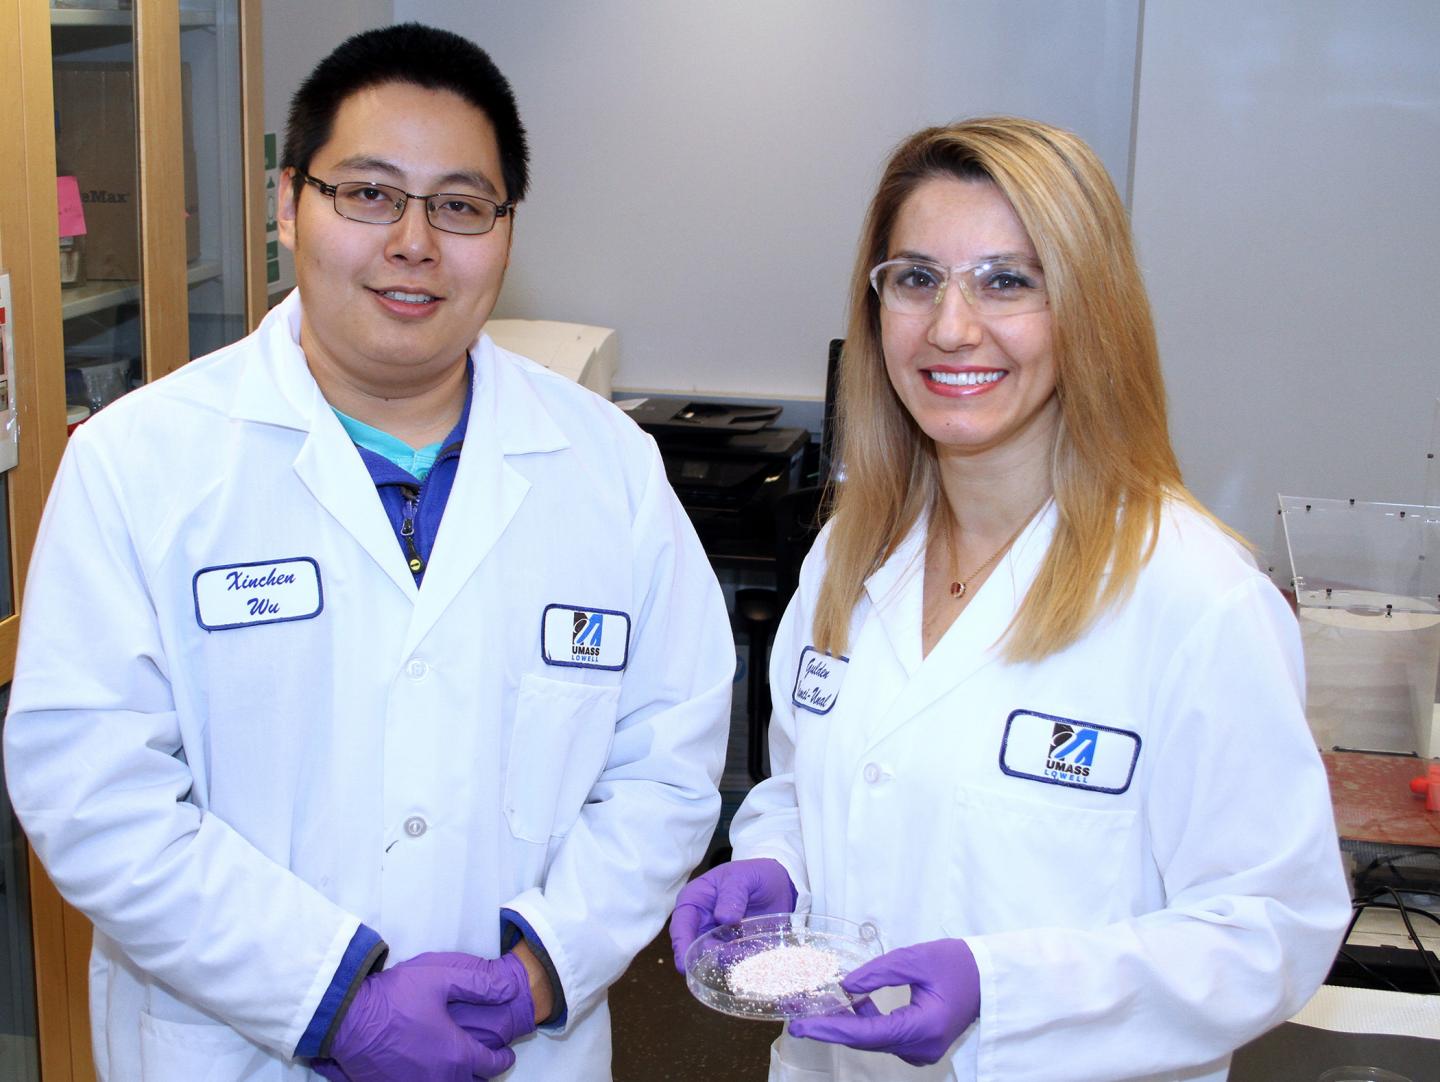 UMass Lowell Researchers Identify Eggshells for Use in Growing Bone in Laboratory